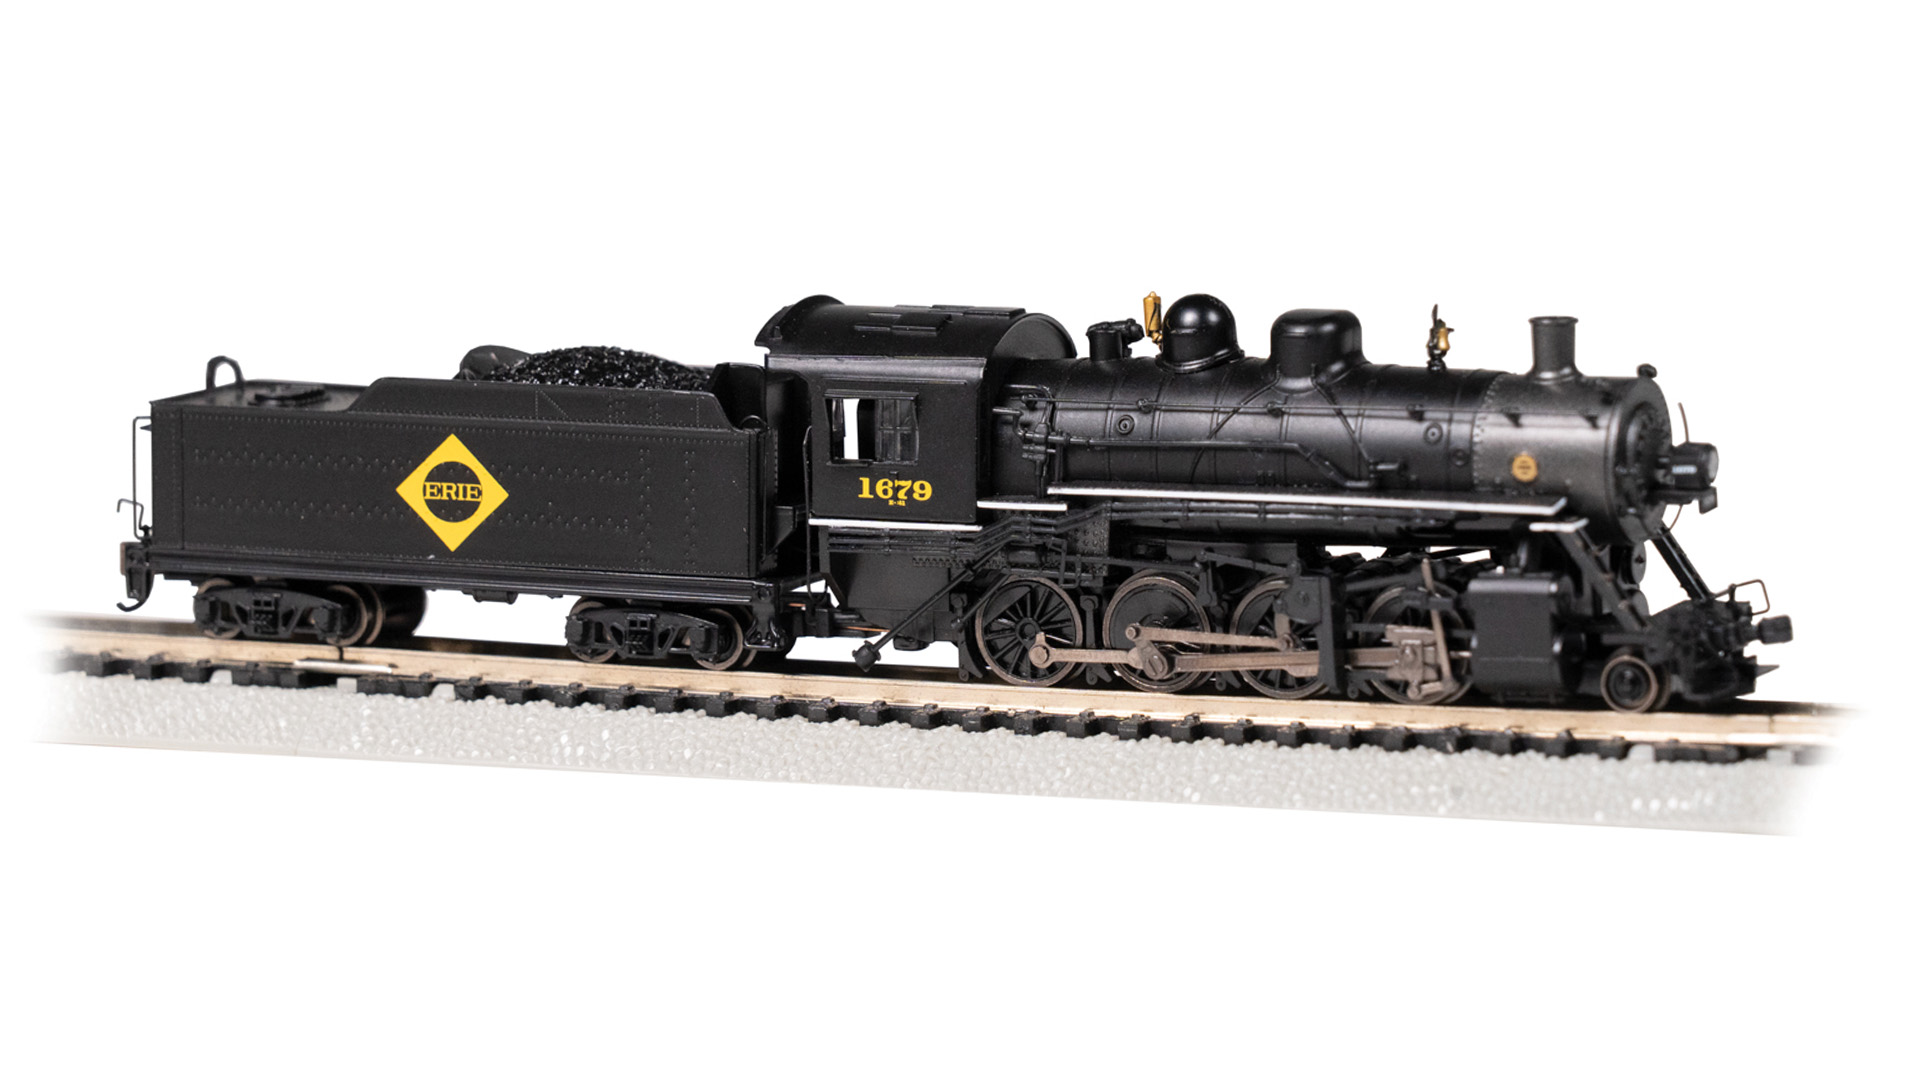 N Scale - Bachmann - 54152 - Locomotive, Steam, 2-8-0 Consolidation - Erie - 1679